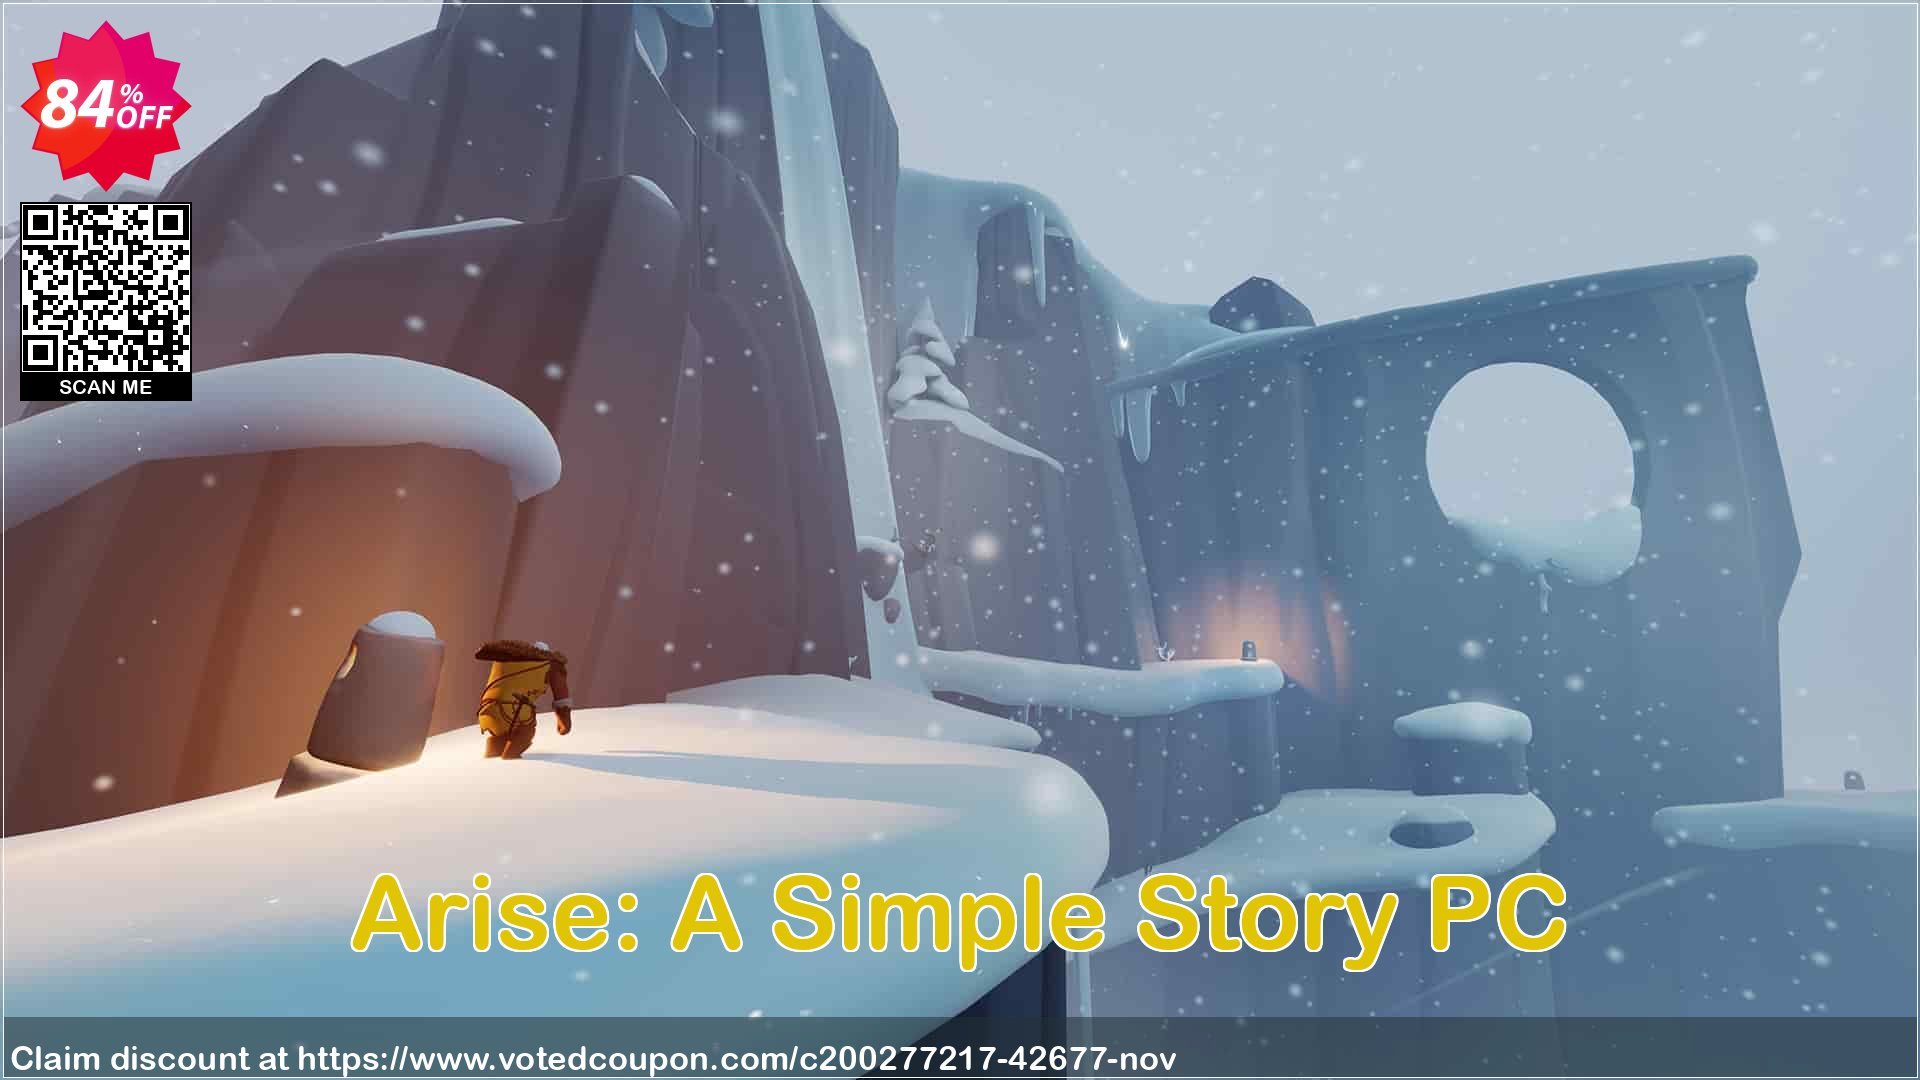 Arise: A Simple Story PC Coupon Code May 2024, 84% OFF - VotedCoupon